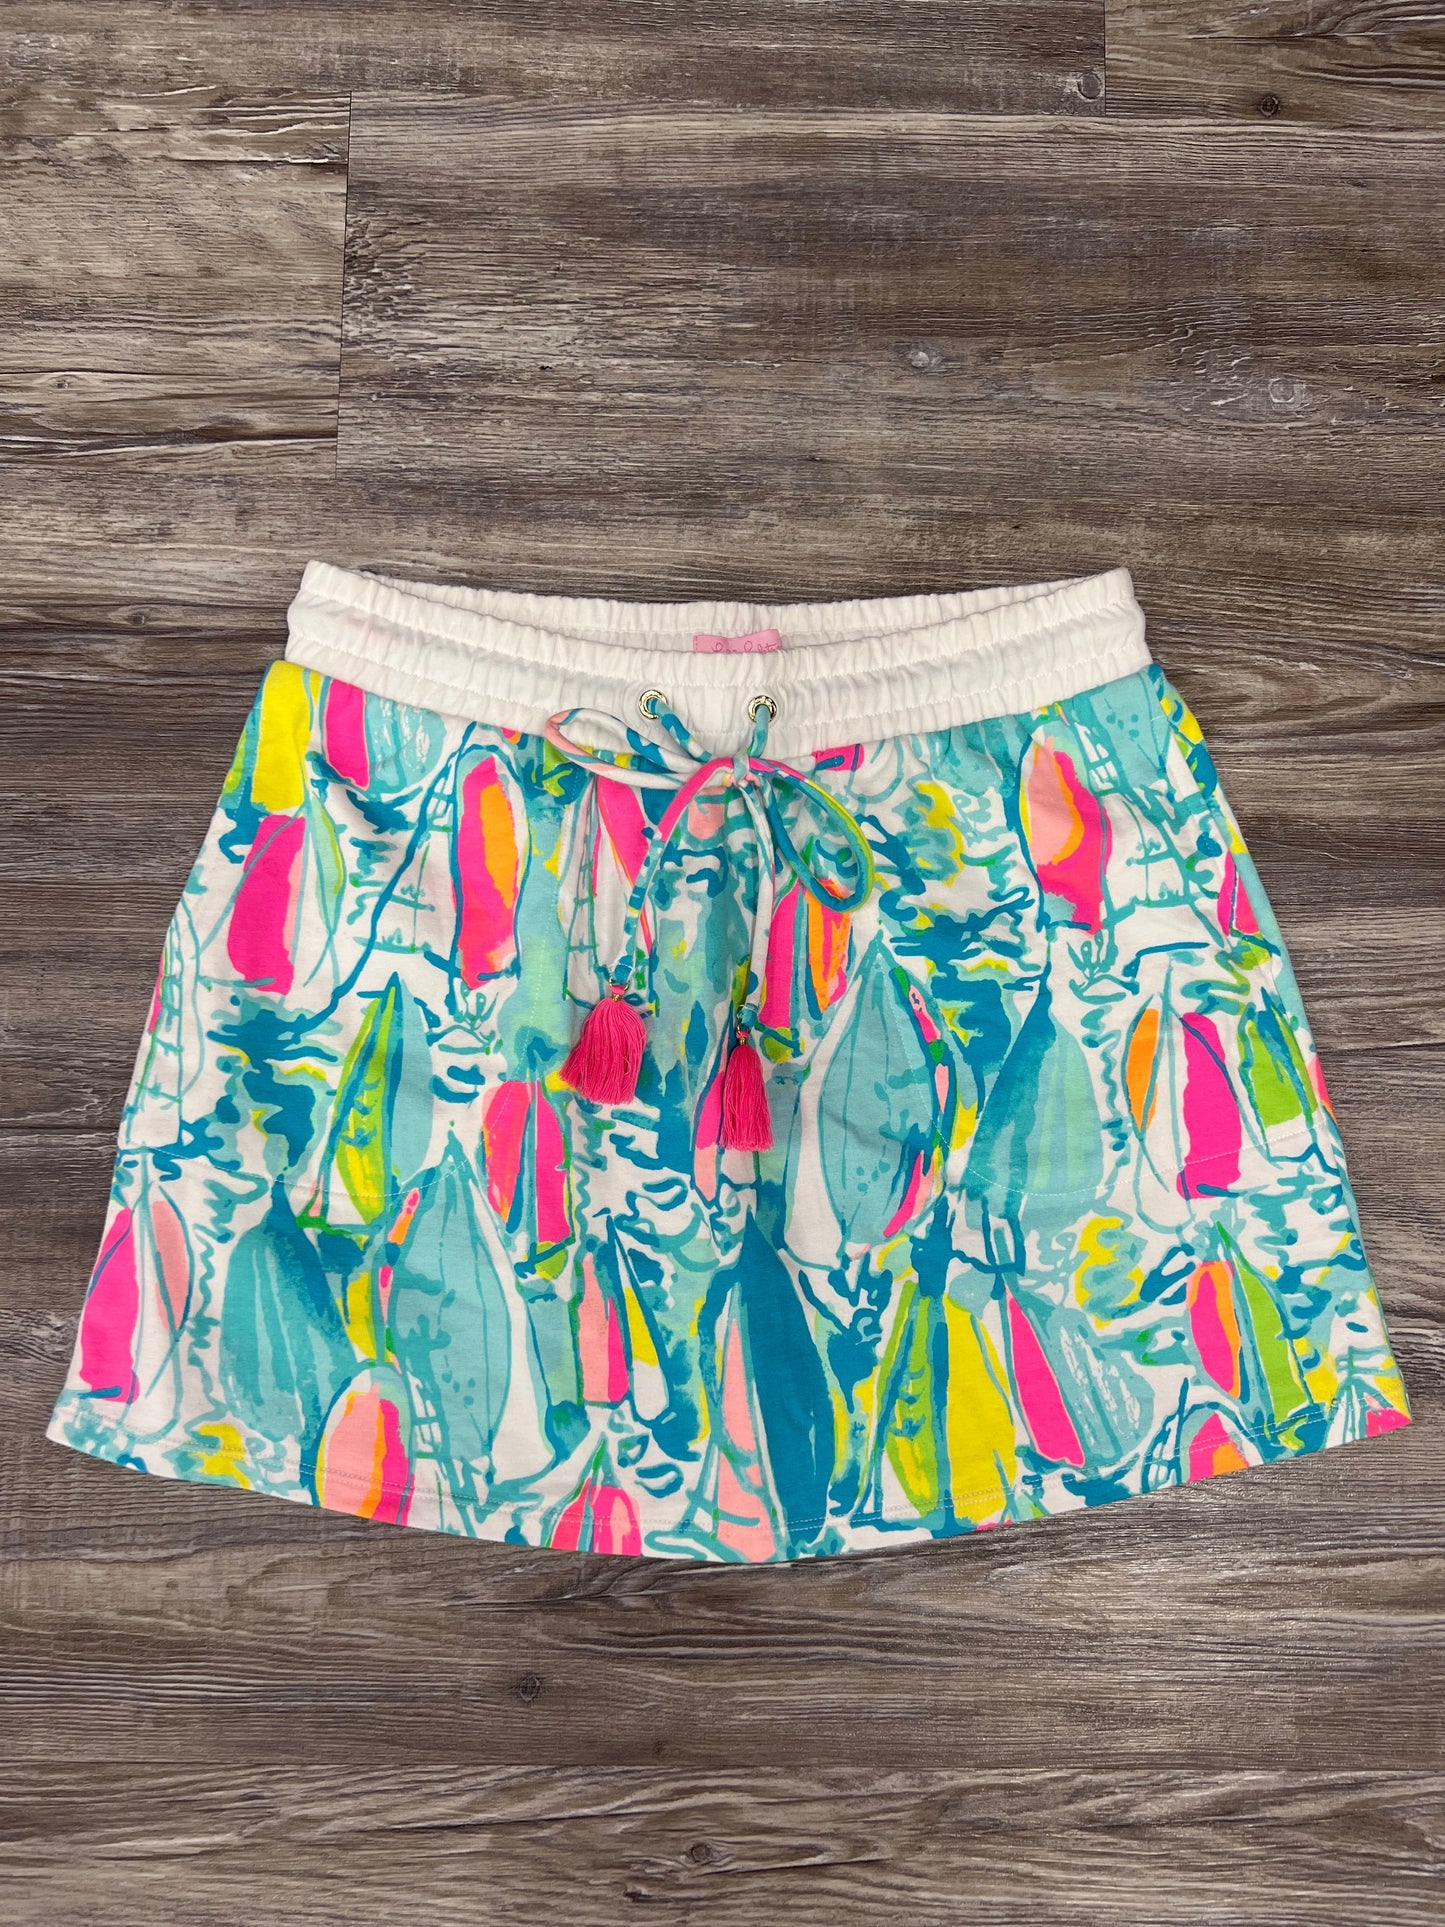 Multi-colored Skirt Mini & Short Lilly Pulitzer, Size S